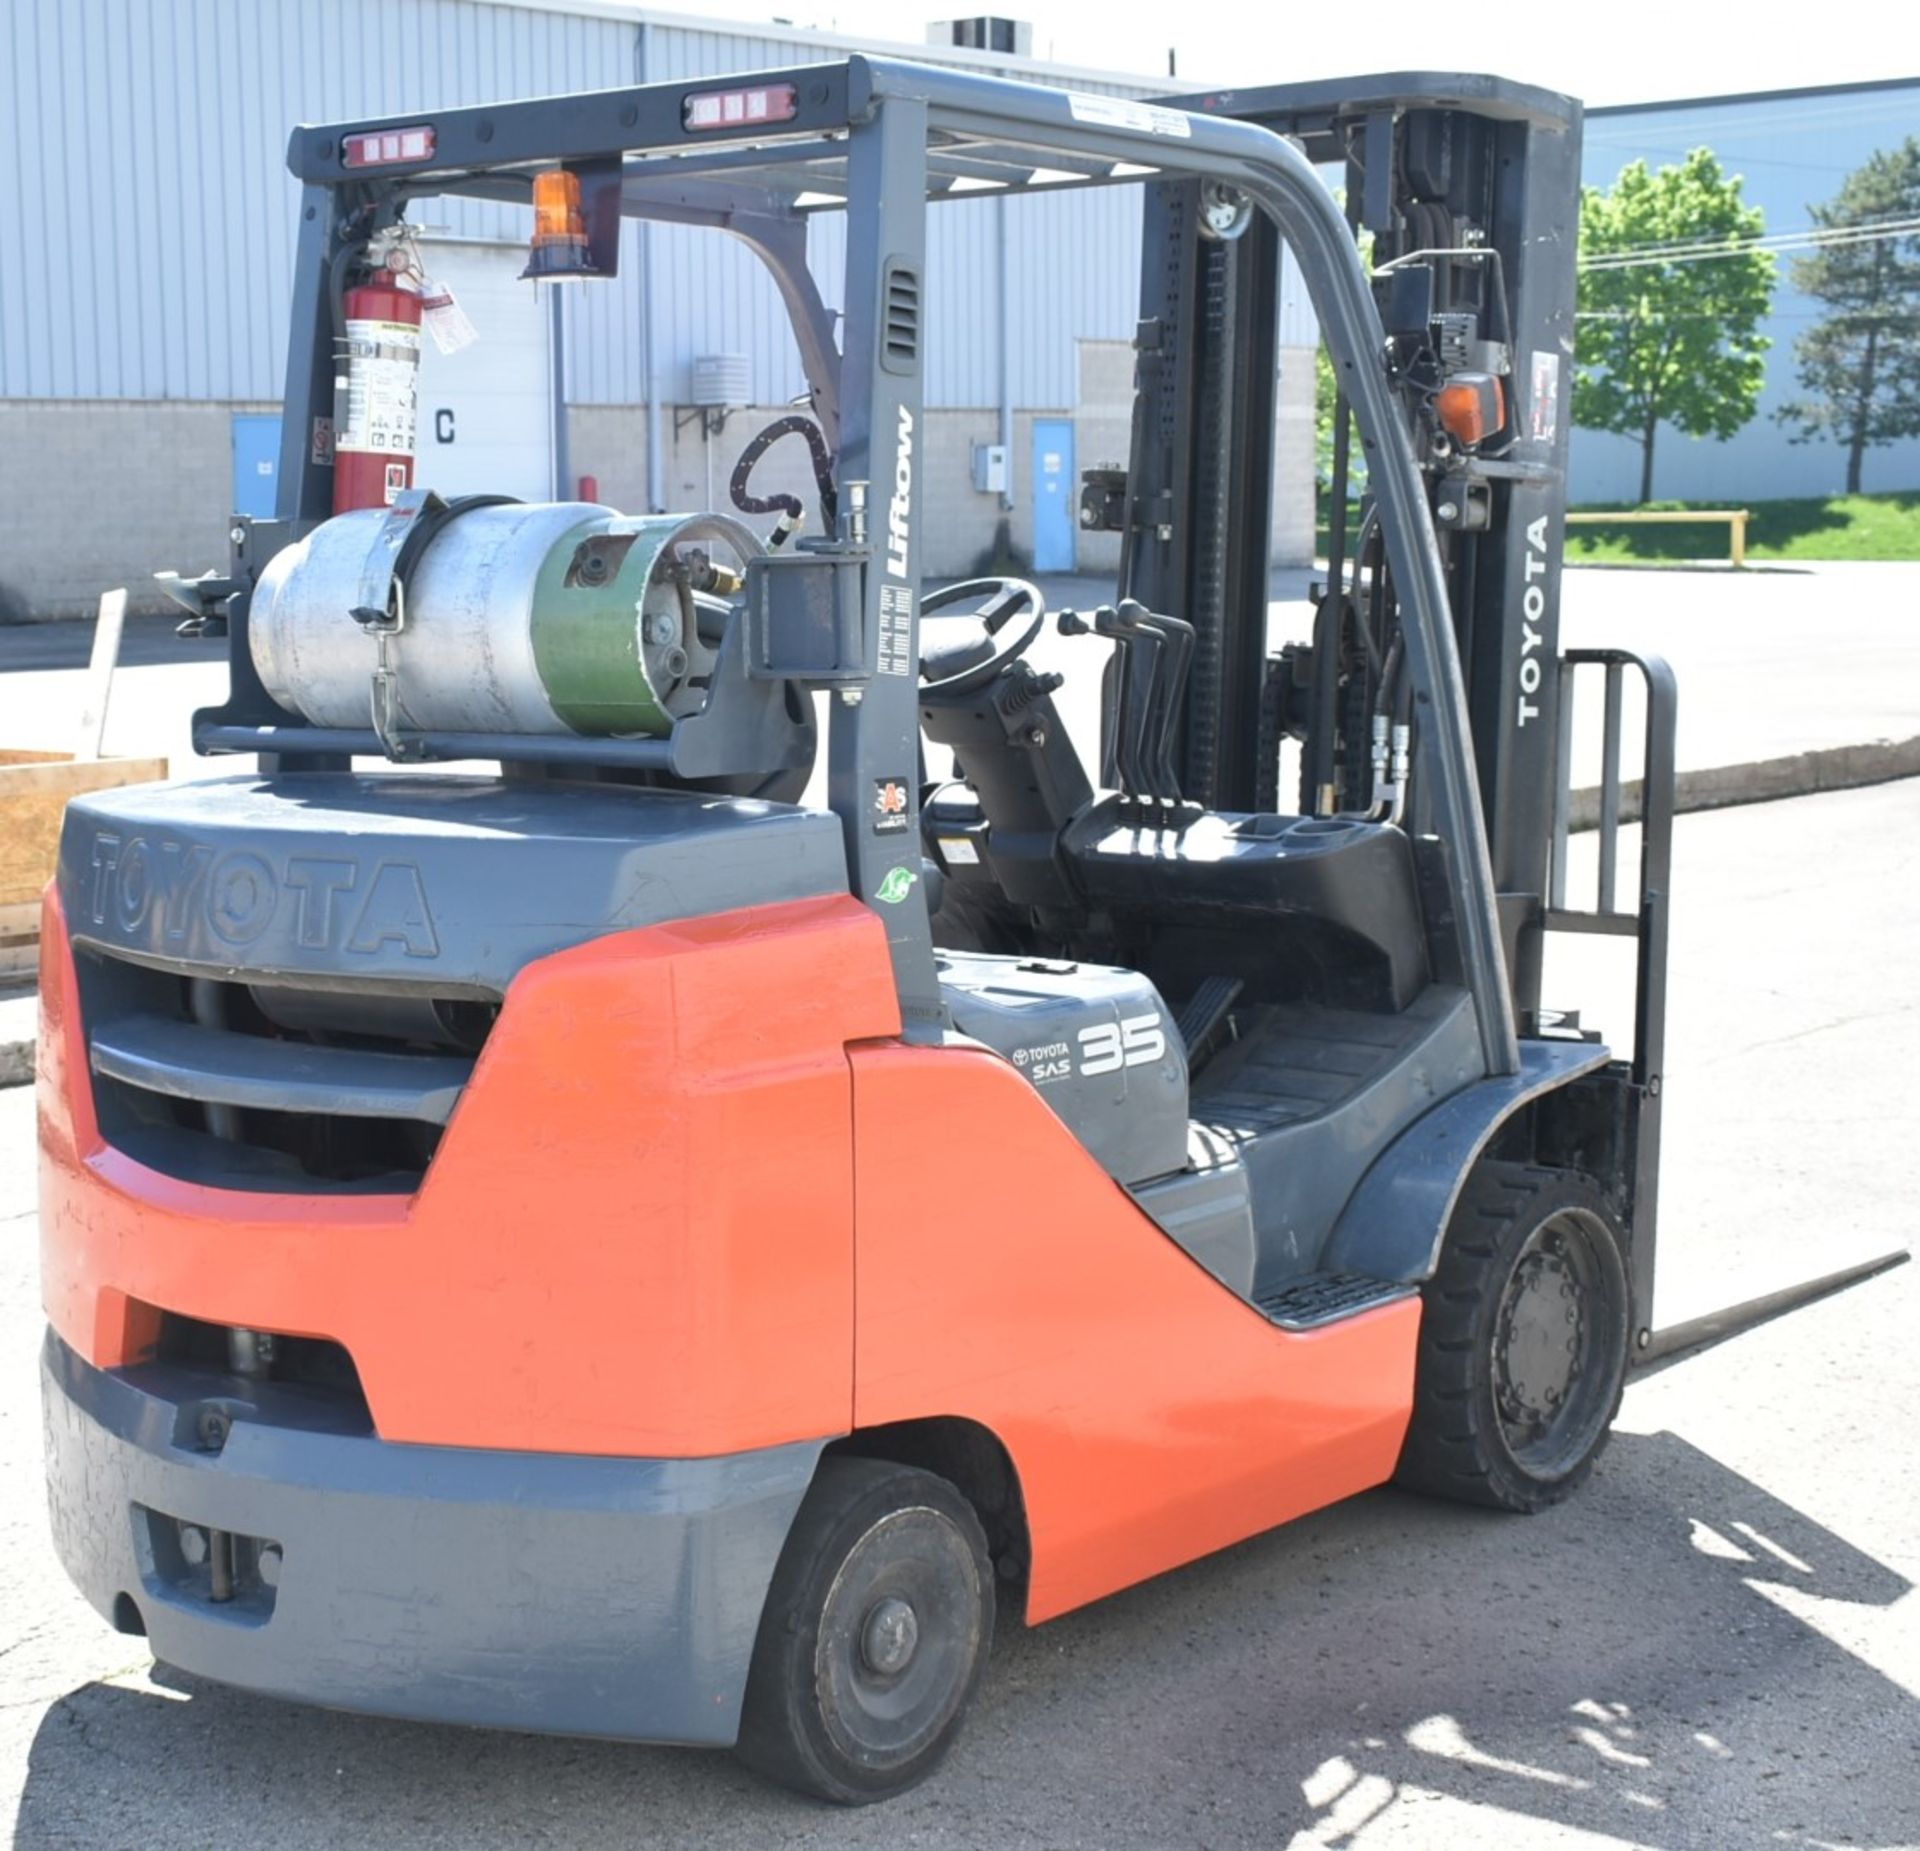 TOYOTA (2018) GC35U LPG FORKLIFT WITH 7250 LBS MAX CAPACITY, 187" 3-STAGE HIGH VISIBILITY MAST, - Image 3 of 8